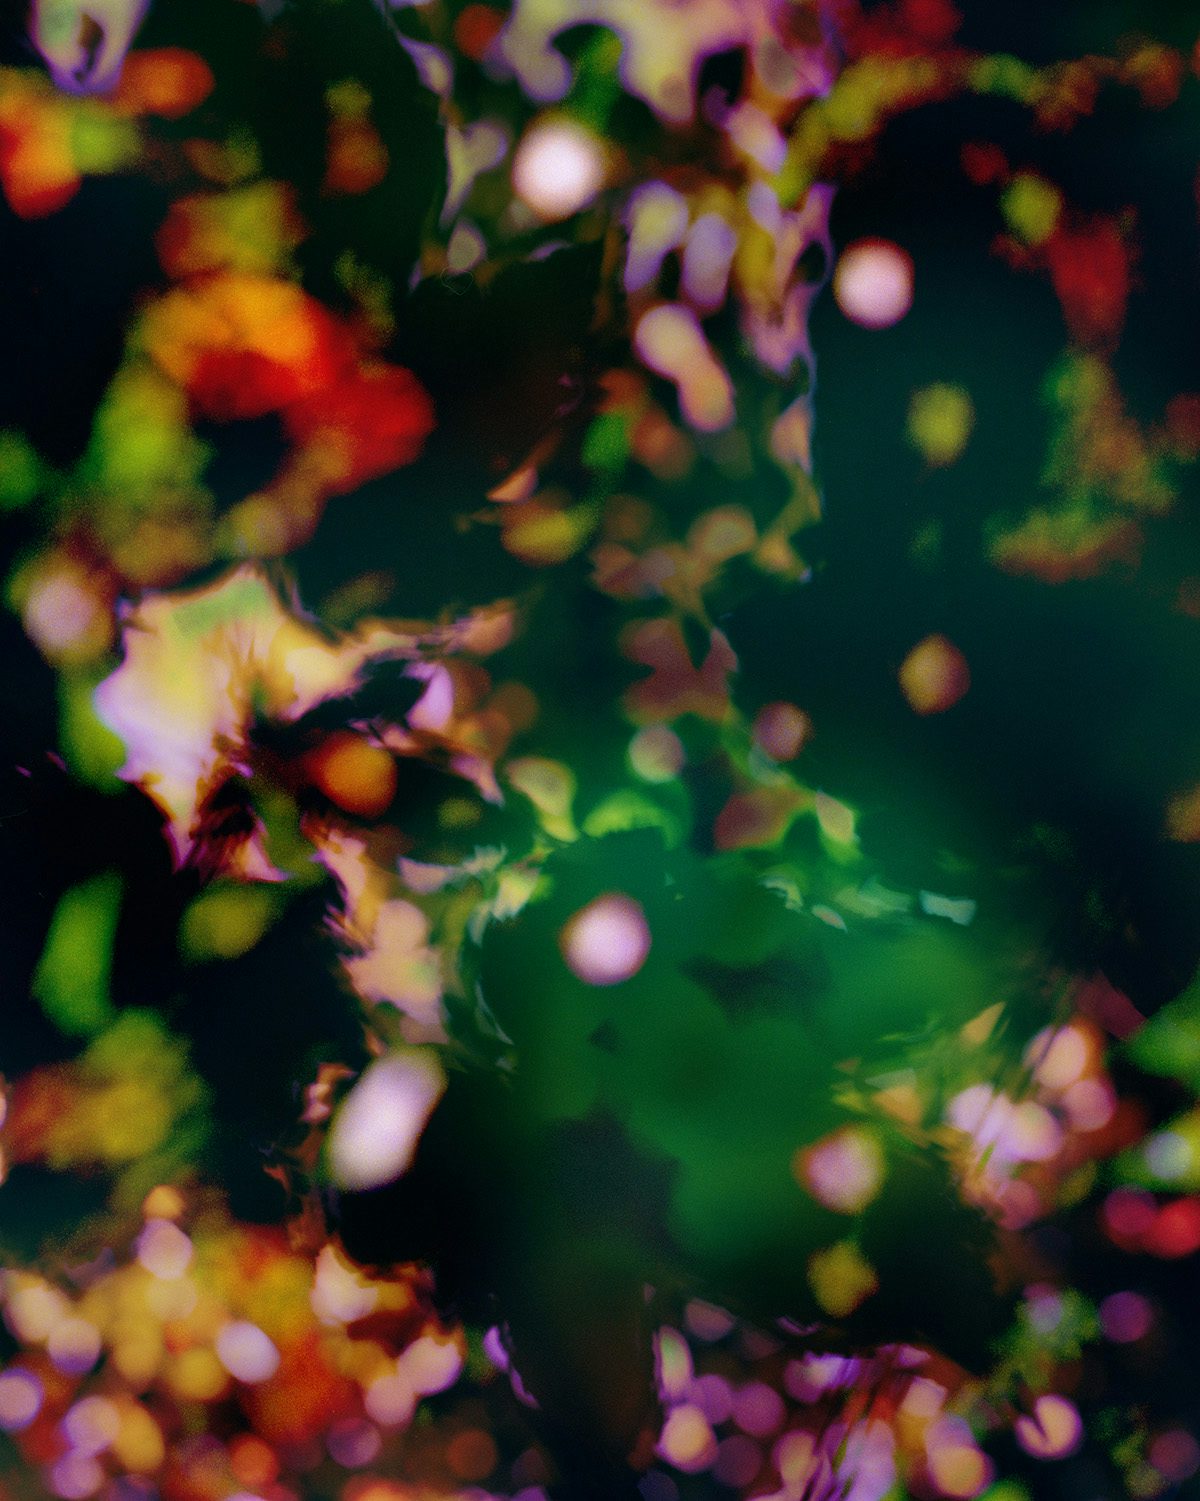 Abstract image of pink and green plantlife